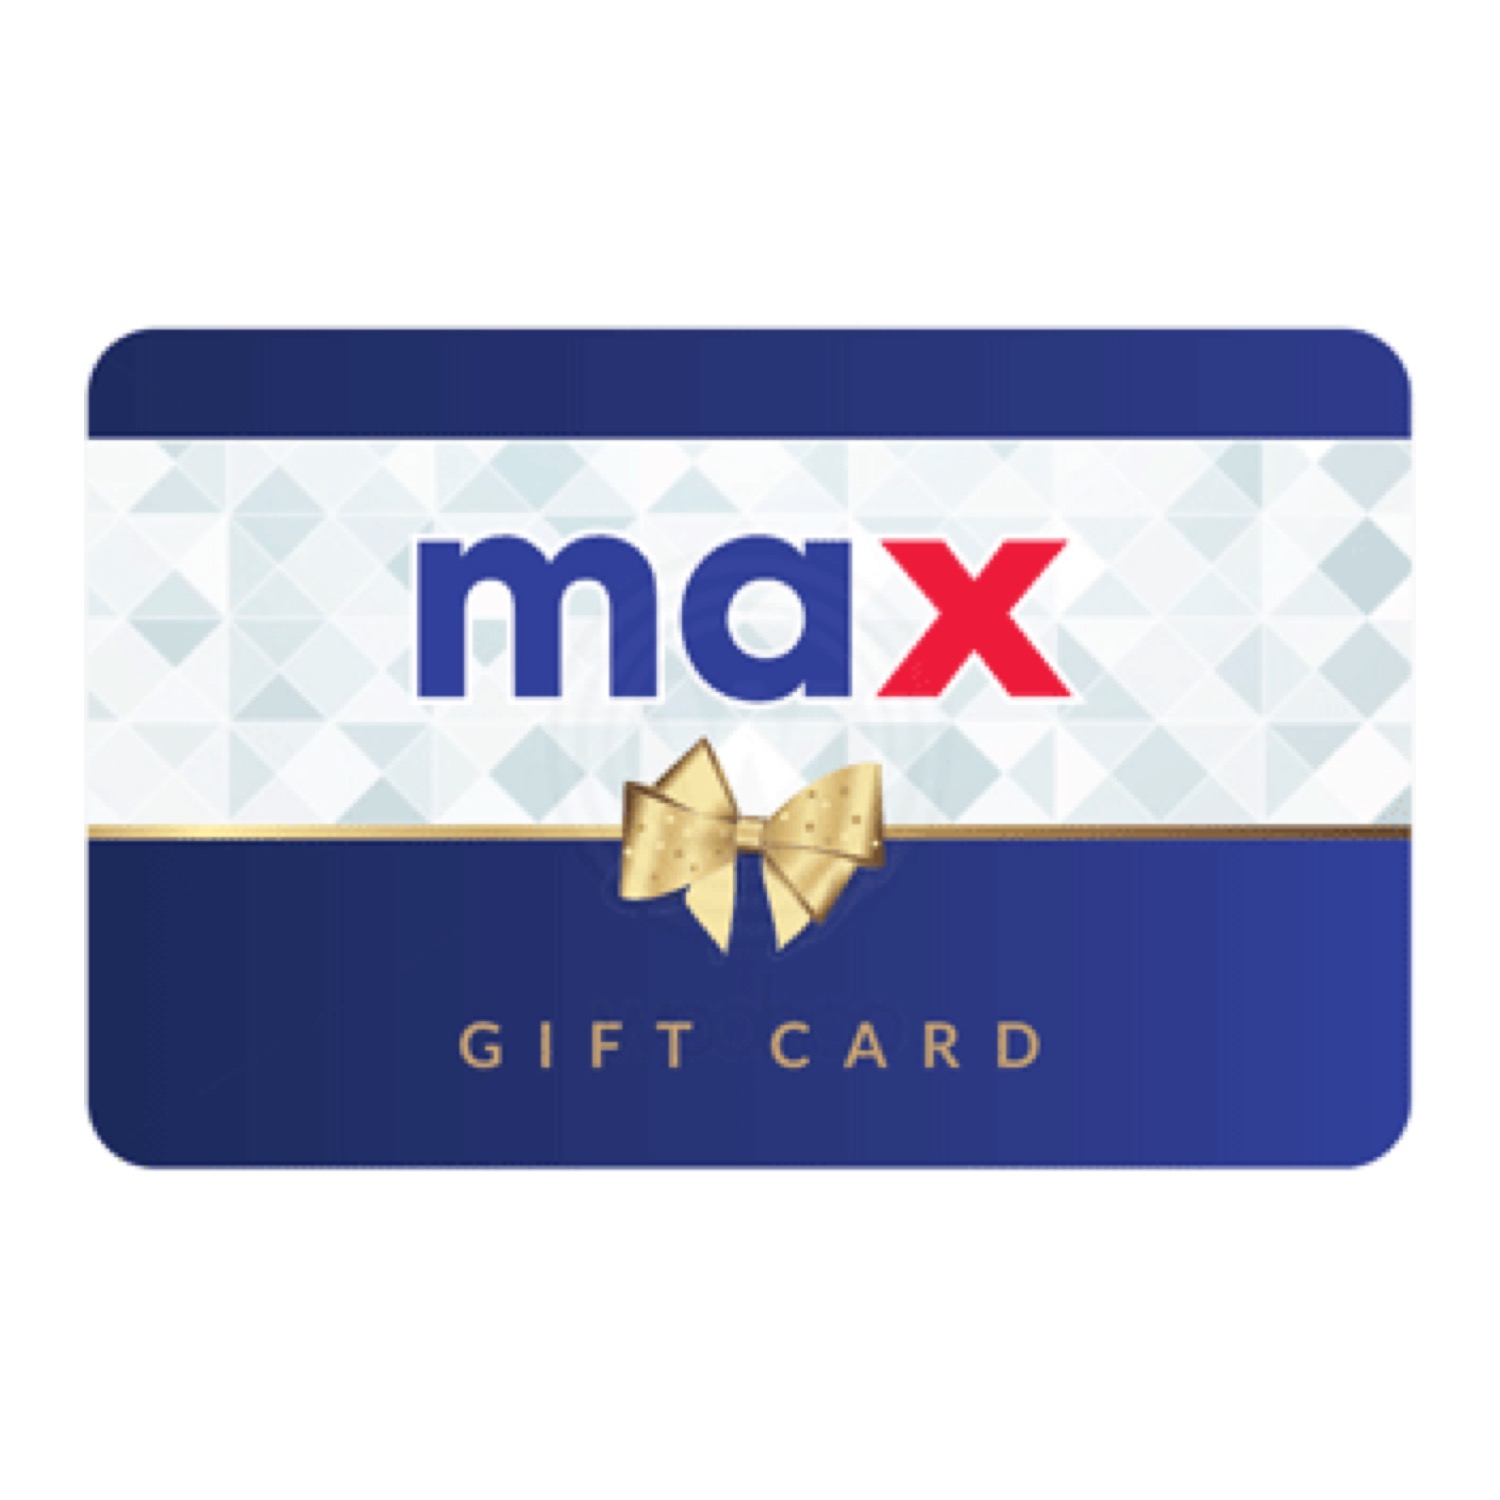 Max Fashion - Max wishes you a joyous #dussehra 💫 Give the gift of choice  this festive season and #unlockhappiness with the max gift card, now  available in stores or https://bit.ly/37bwp0N ✨ #